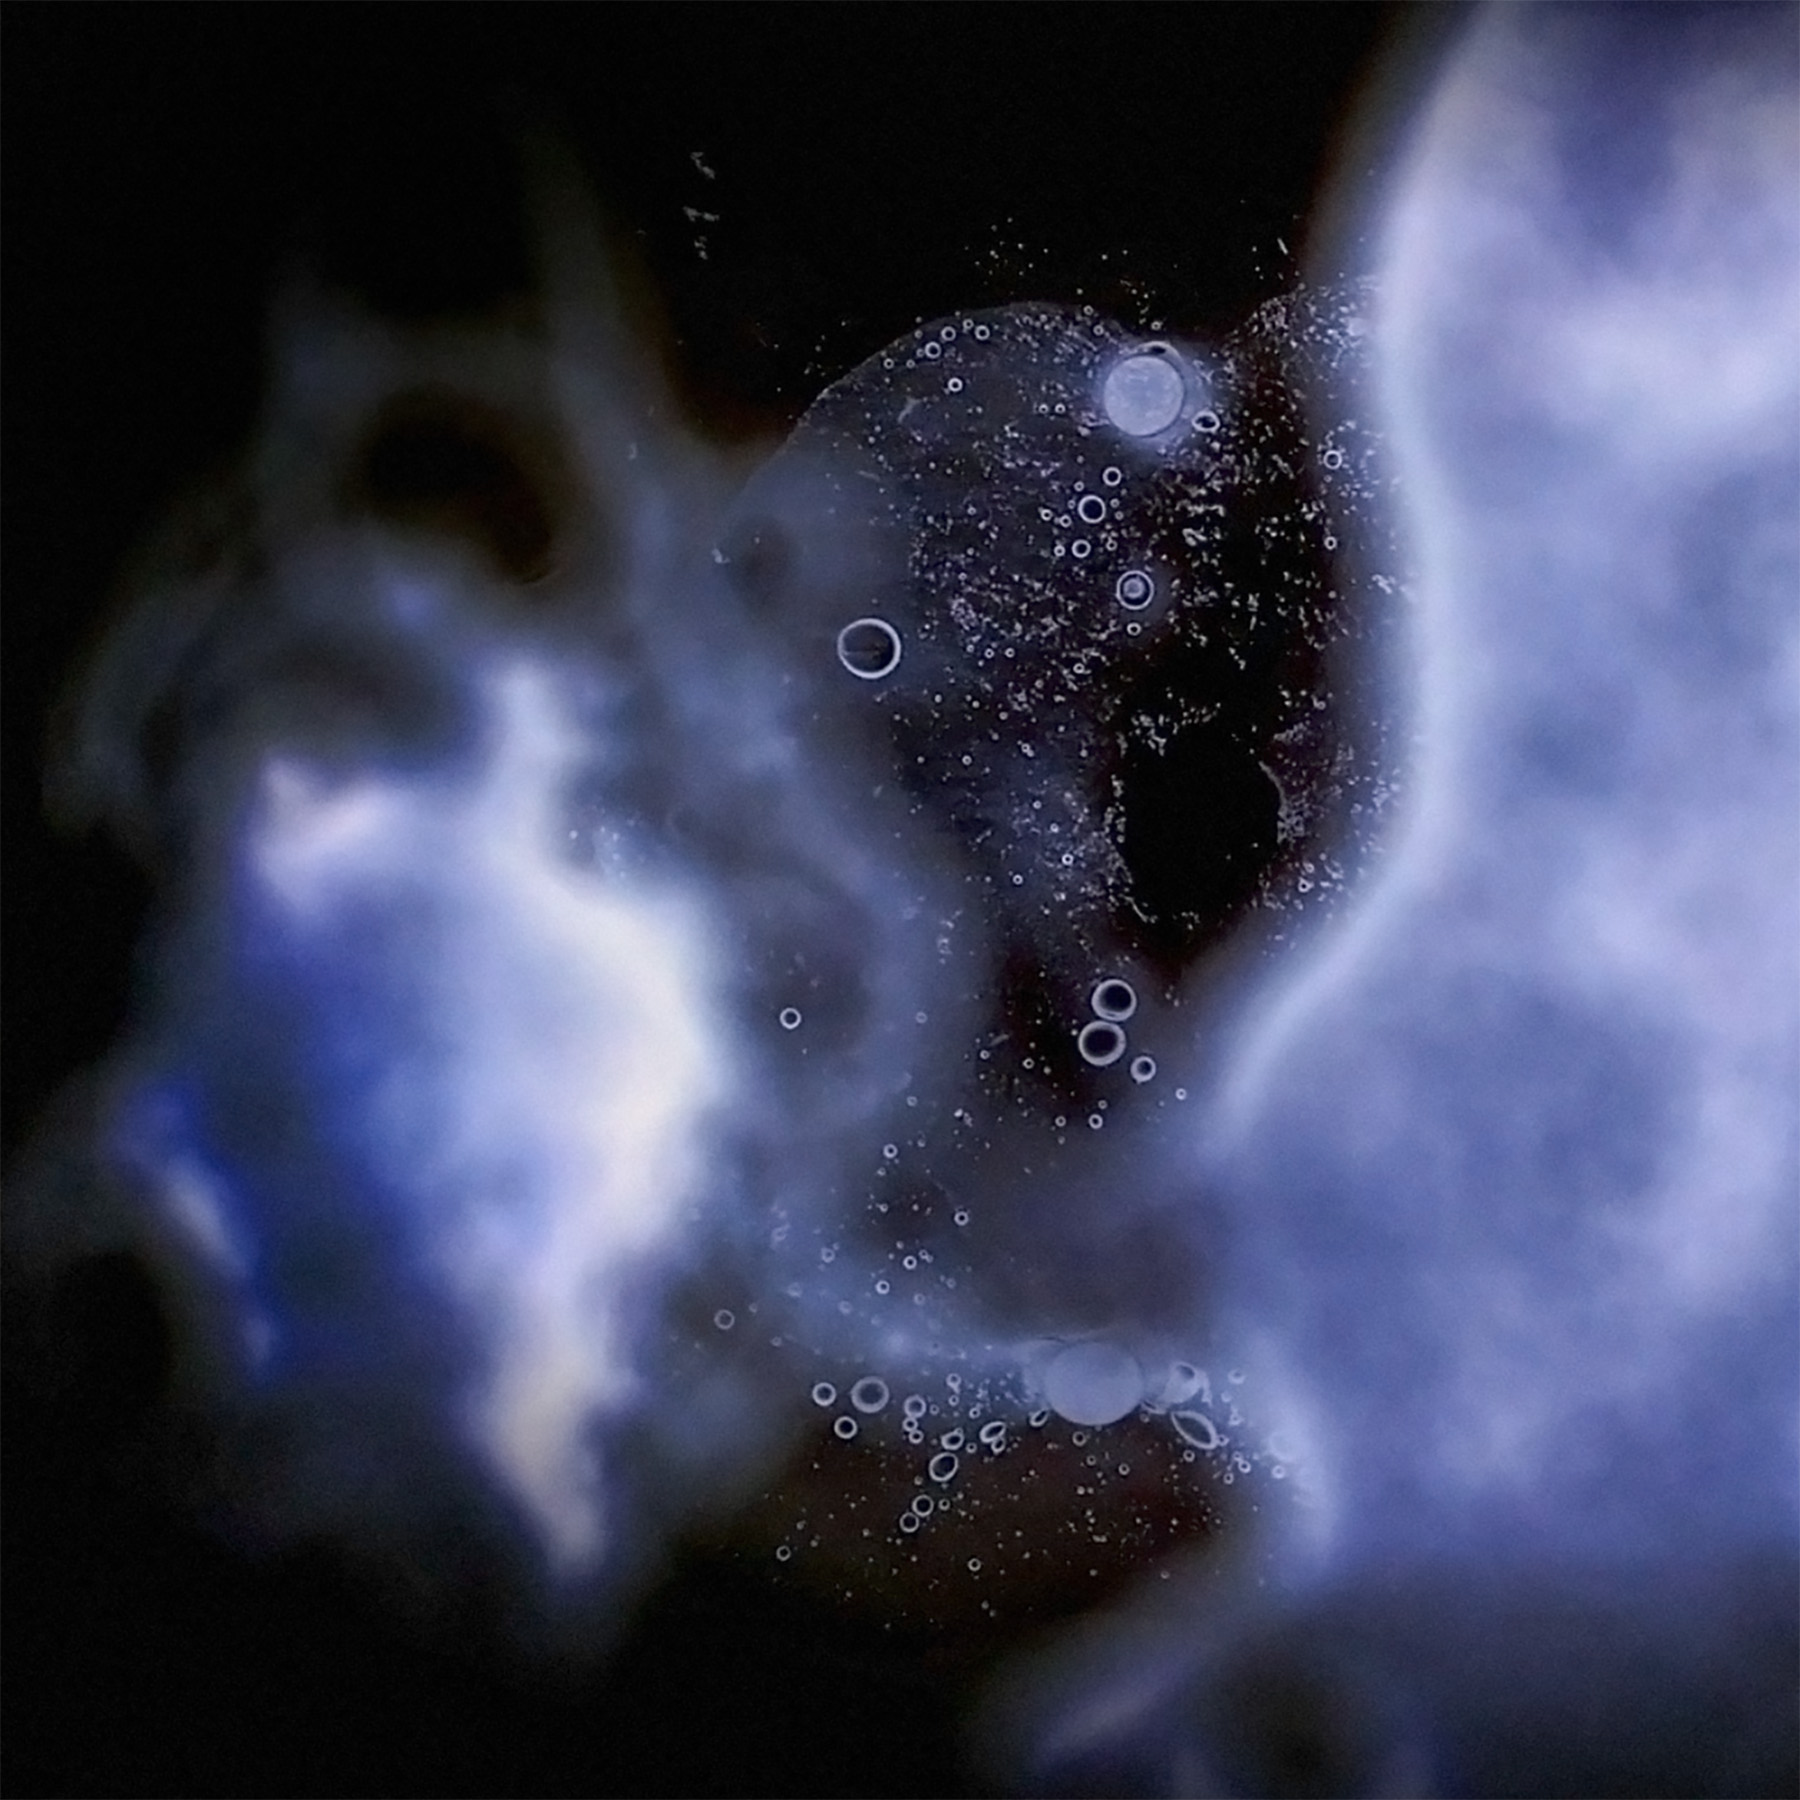 Abstract image of blurry, fluid, white shapes on a dark background.